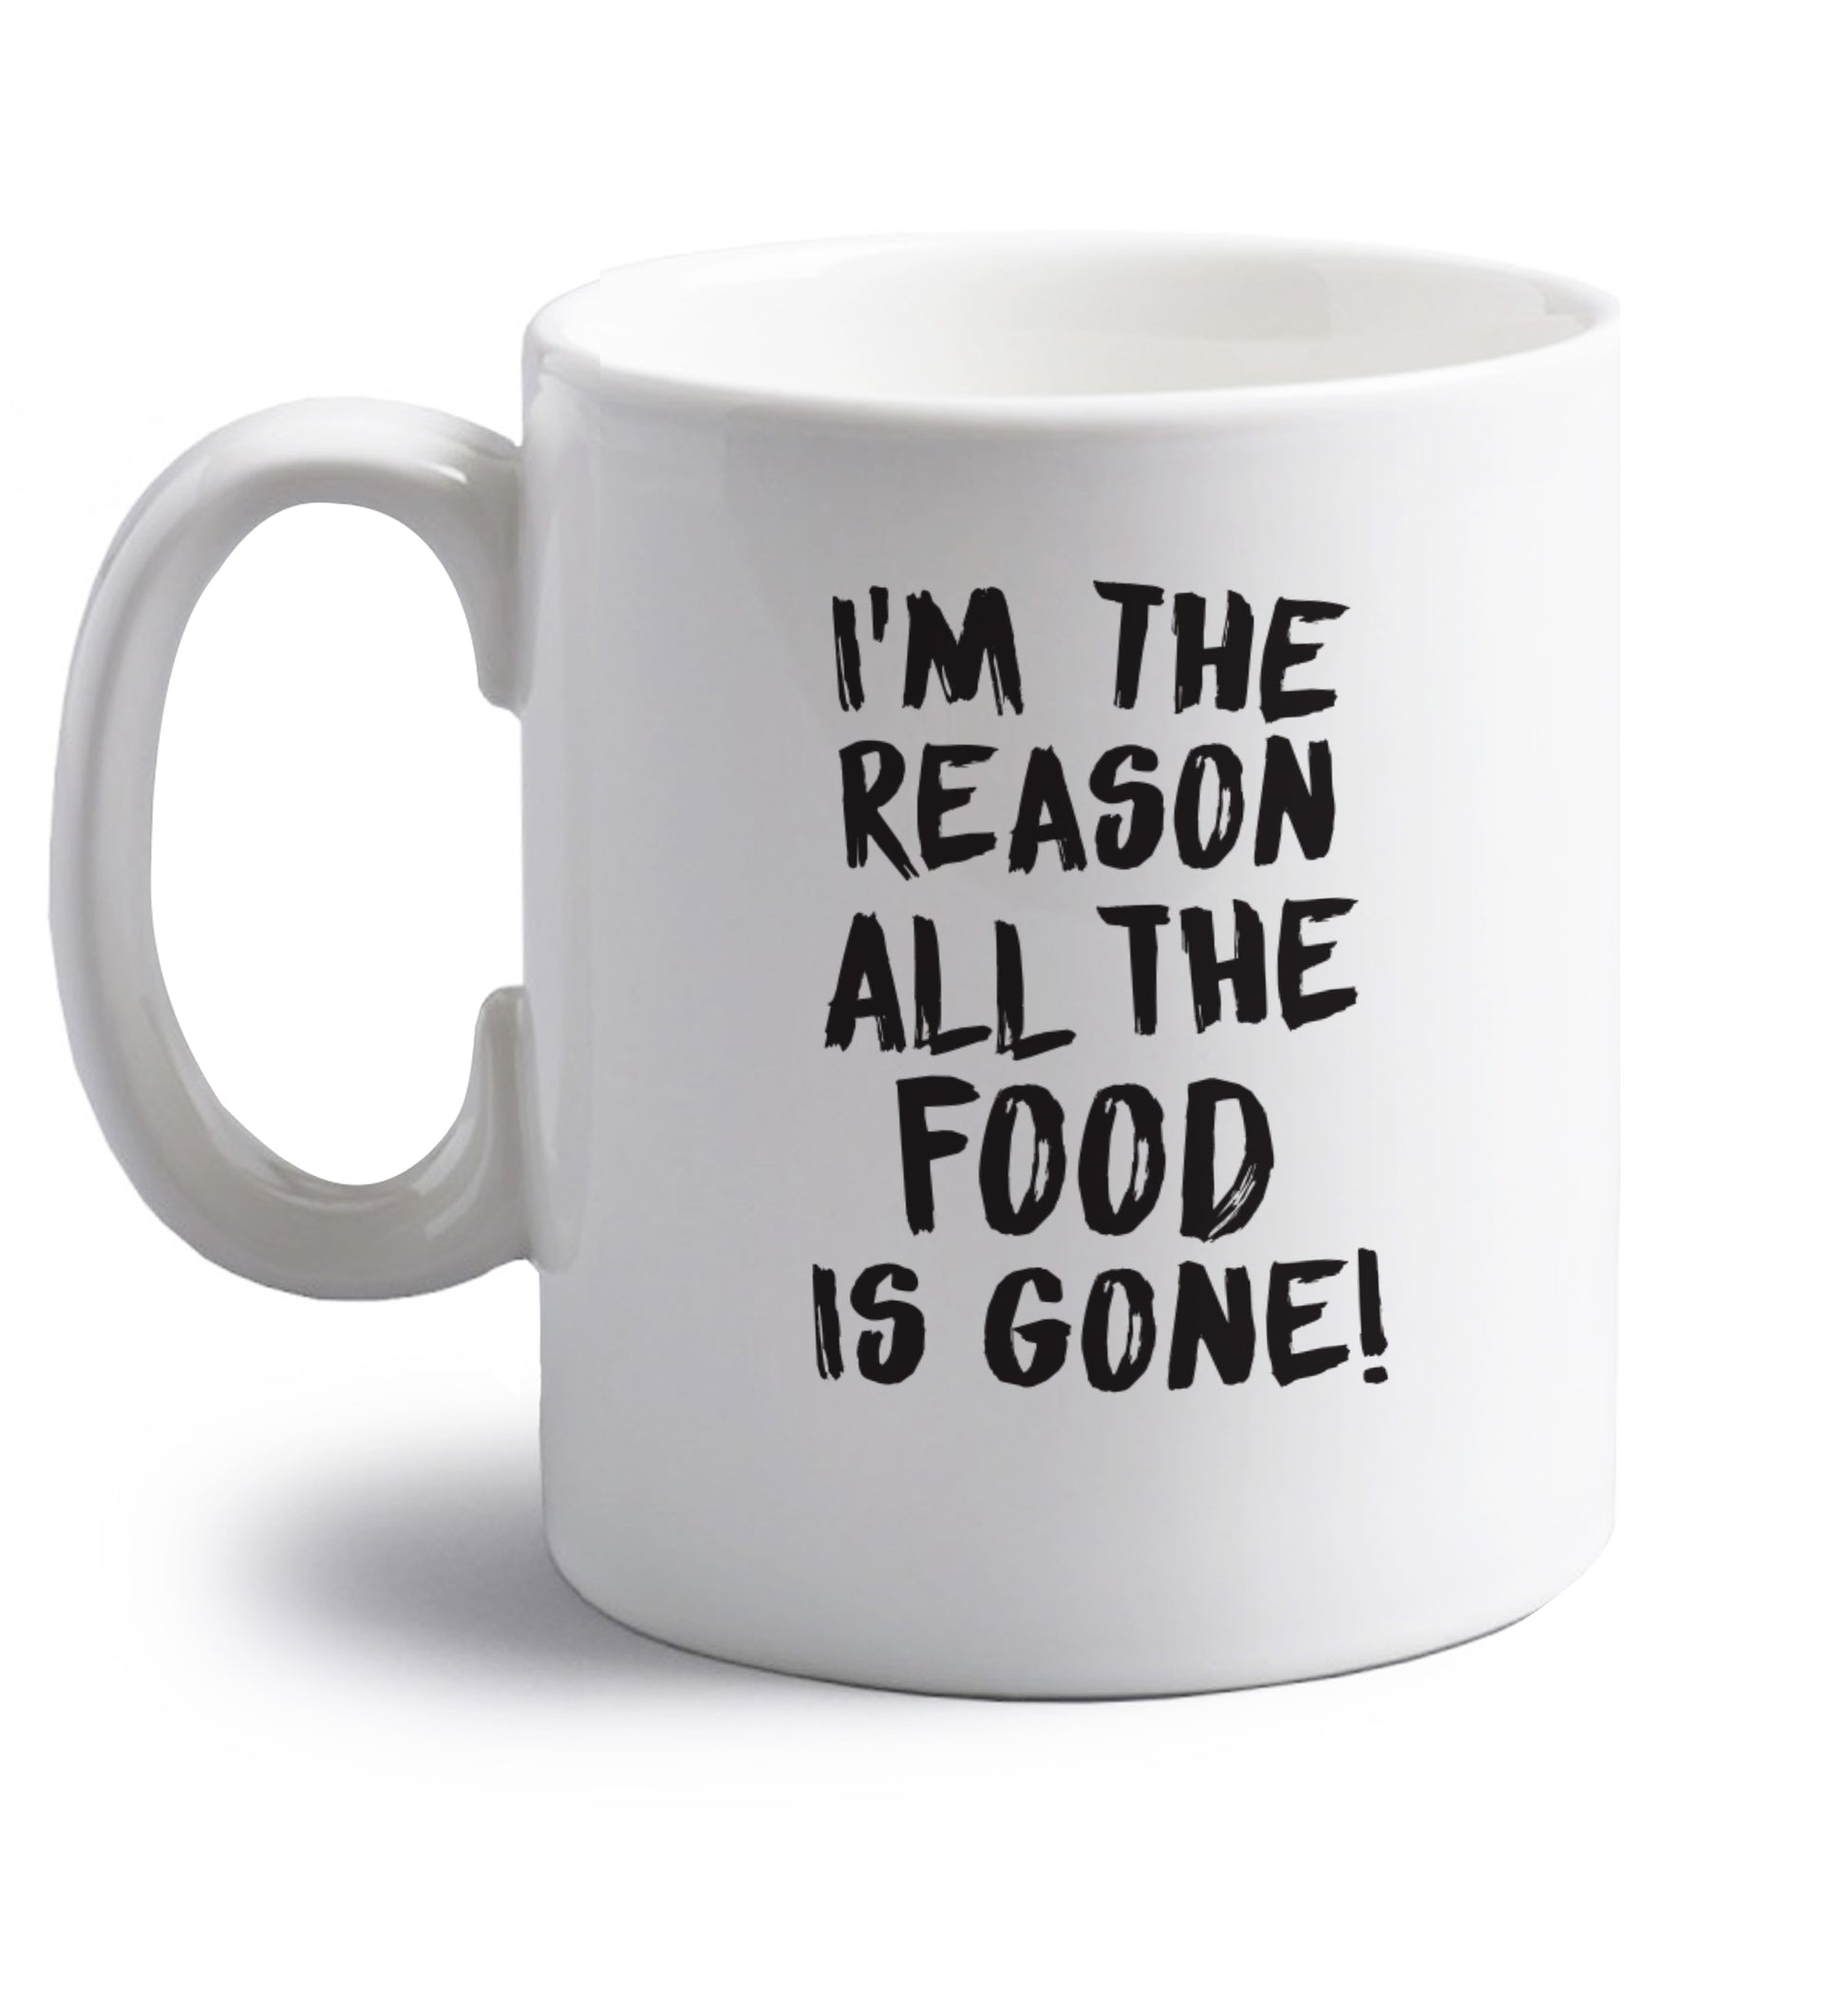 I'm the reason why all the food is gone right handed white ceramic mug 